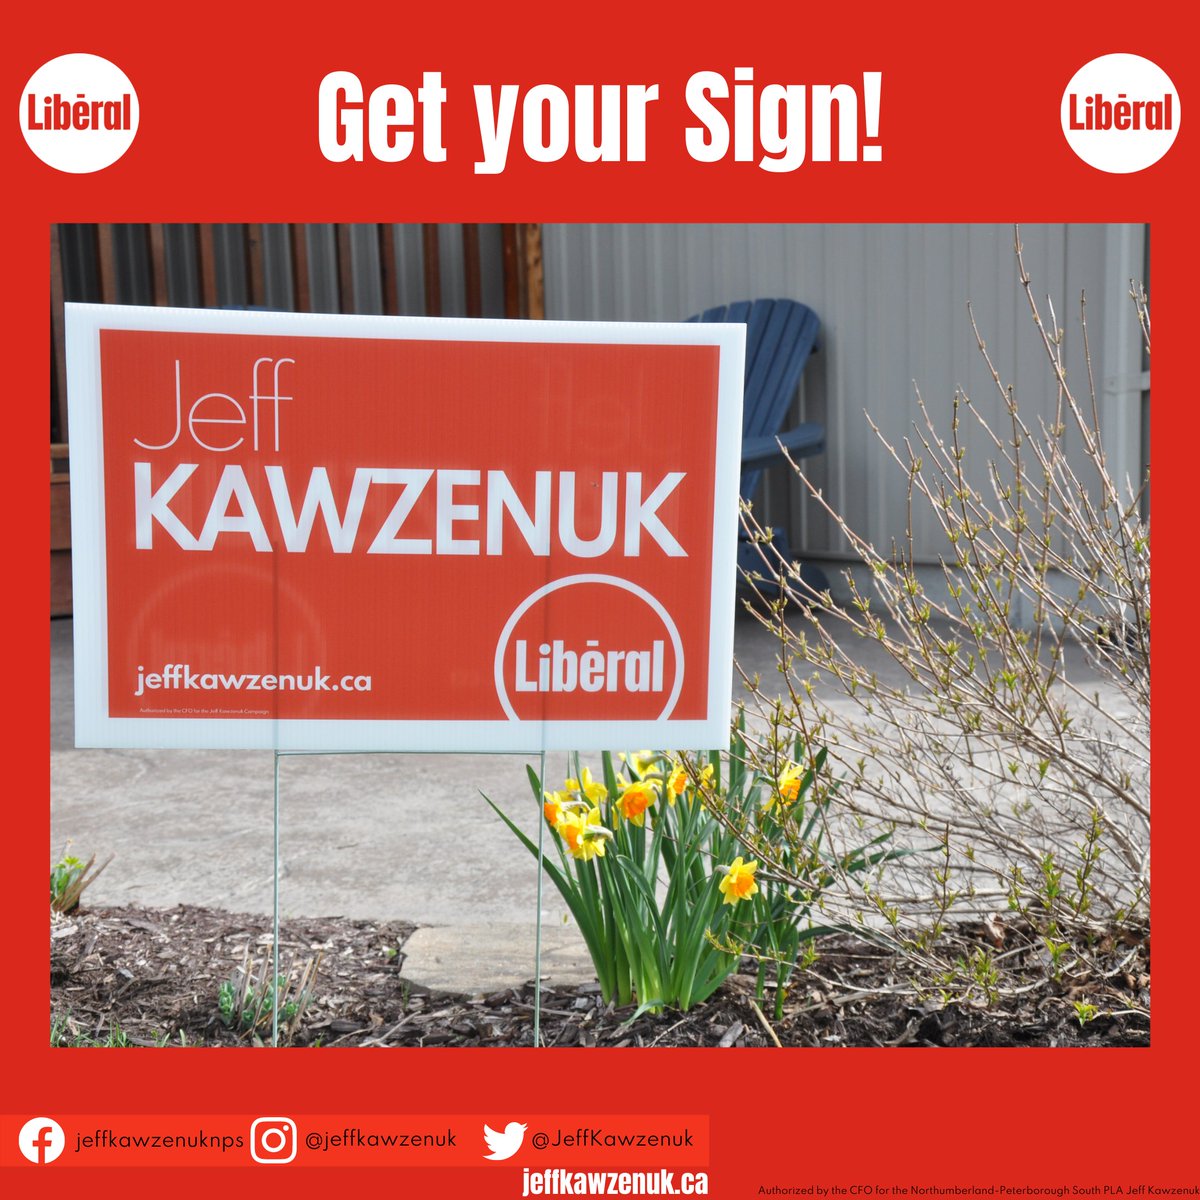 As flowers bloom, so too do Jeff Kawzenuk signs! If you haven't gotten a sign, be sure to get one! Send a private message and we will organize a set-up. If you already have one, please share this post!